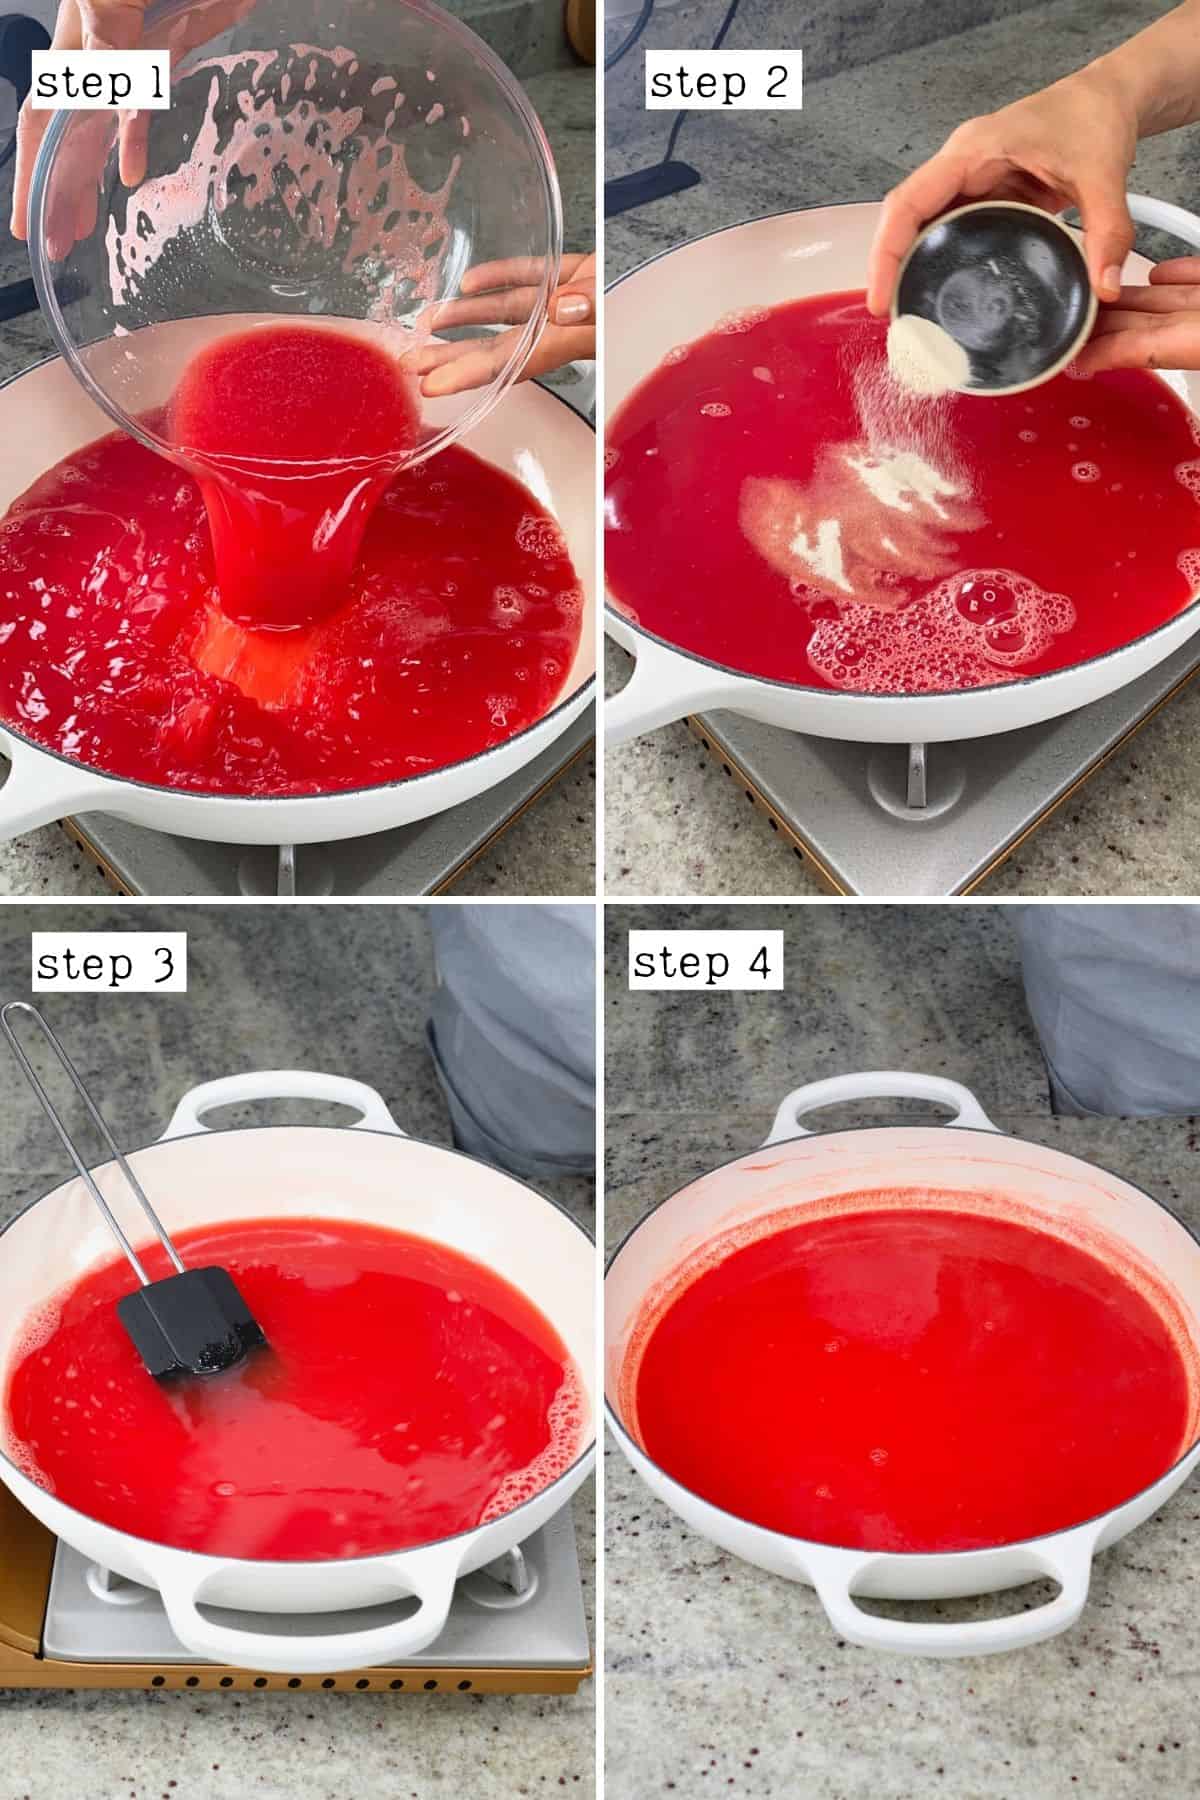 Steps for making watermelon jelly